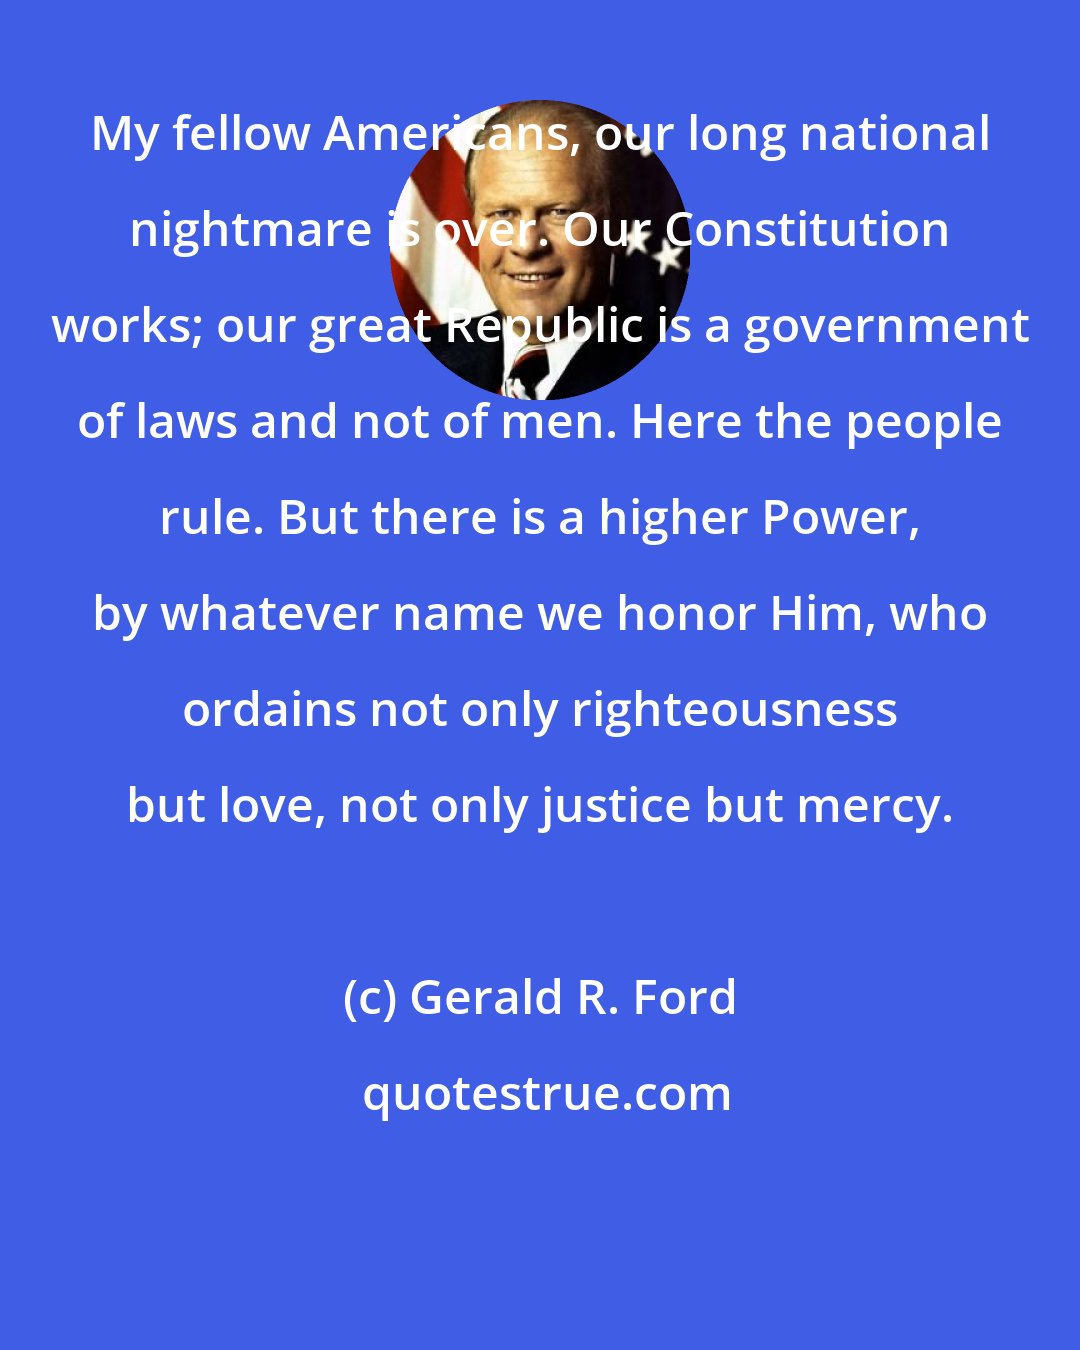 Gerald R. Ford: My fellow Americans, our long national nightmare is over. Our Constitution works; our great Republic is a government of laws and not of men. Here the people rule. But there is a higher Power, by whatever name we honor Him, who ordains not only righteousness but love, not only justice but mercy.